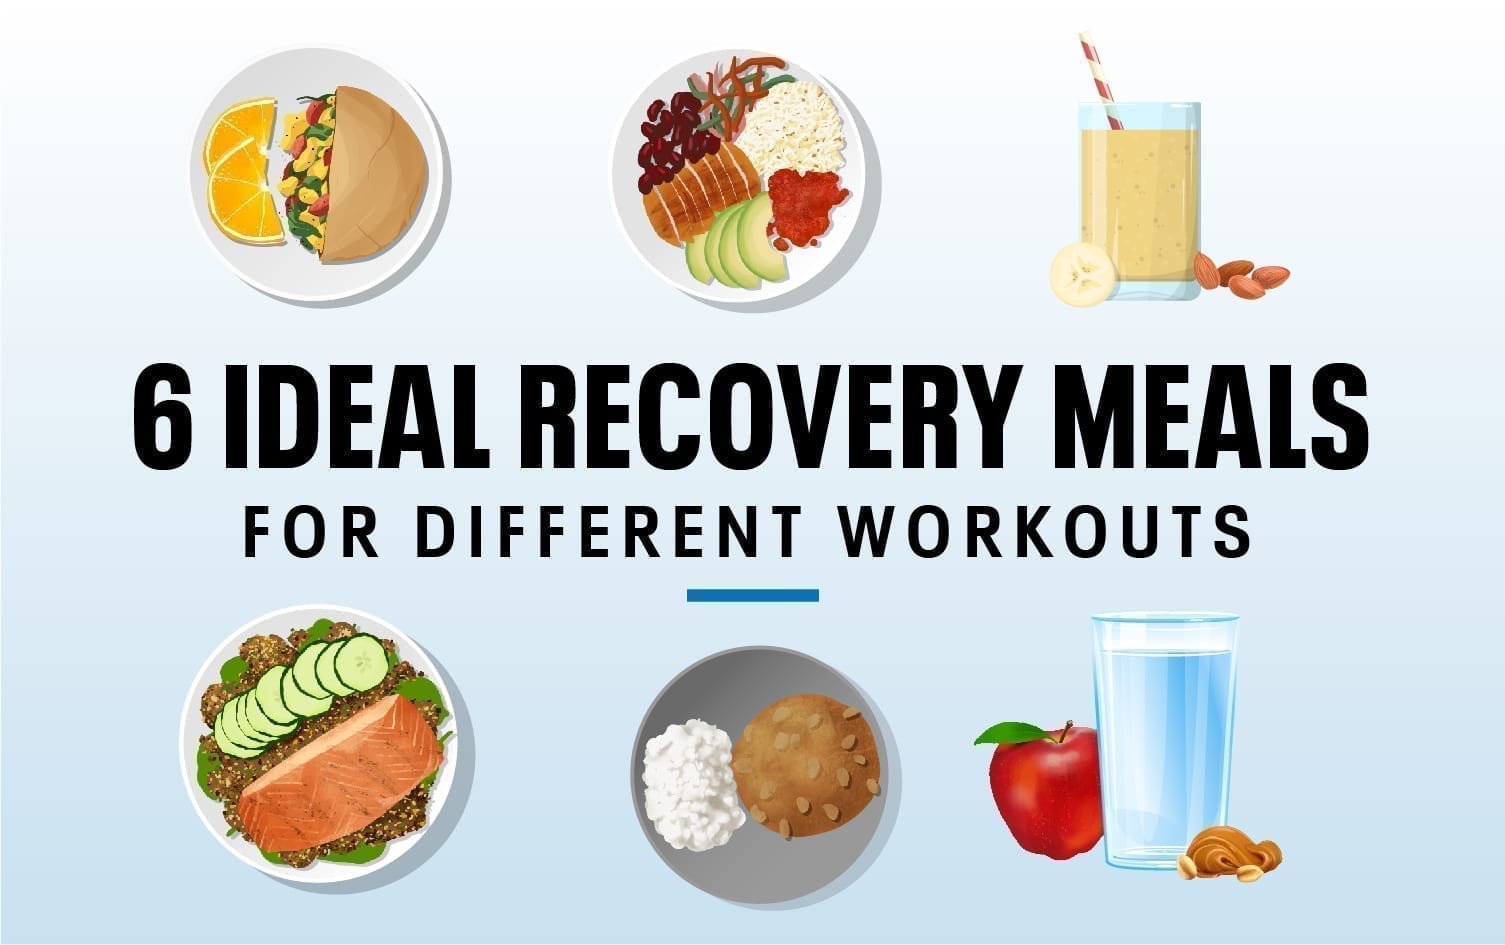 Muscle recovery foods